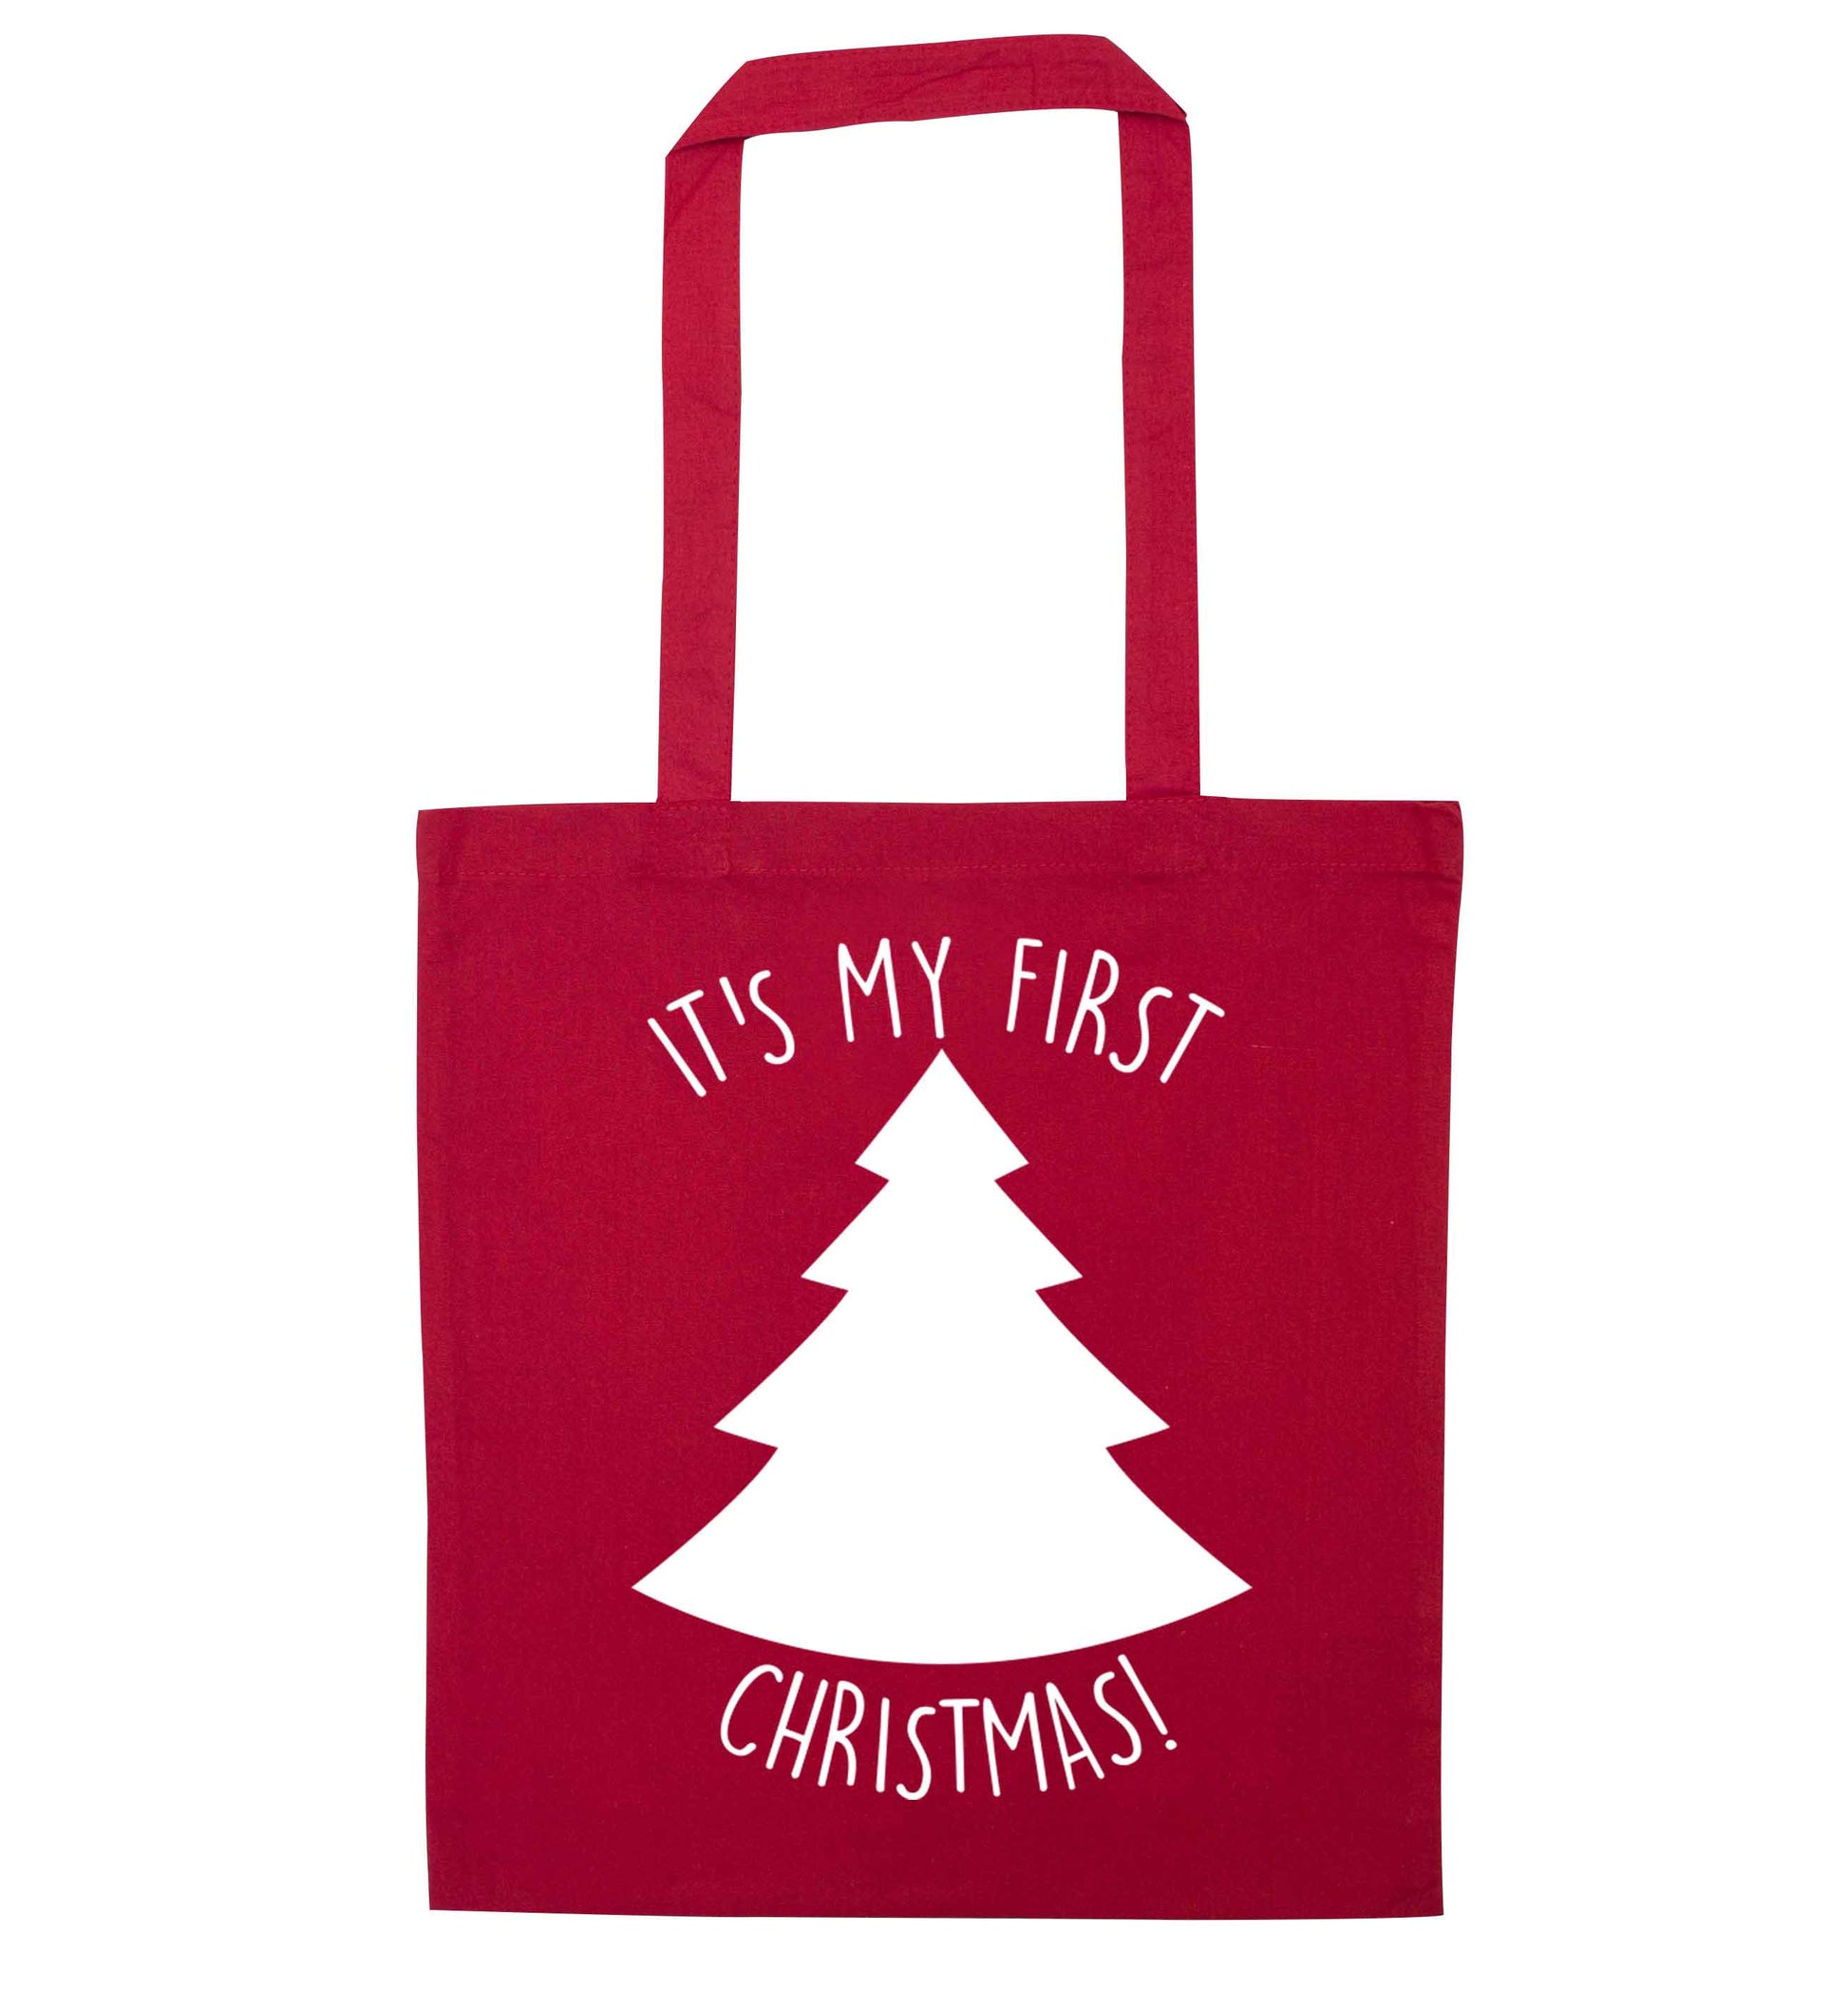 It's my first Christmas - tree red tote bag